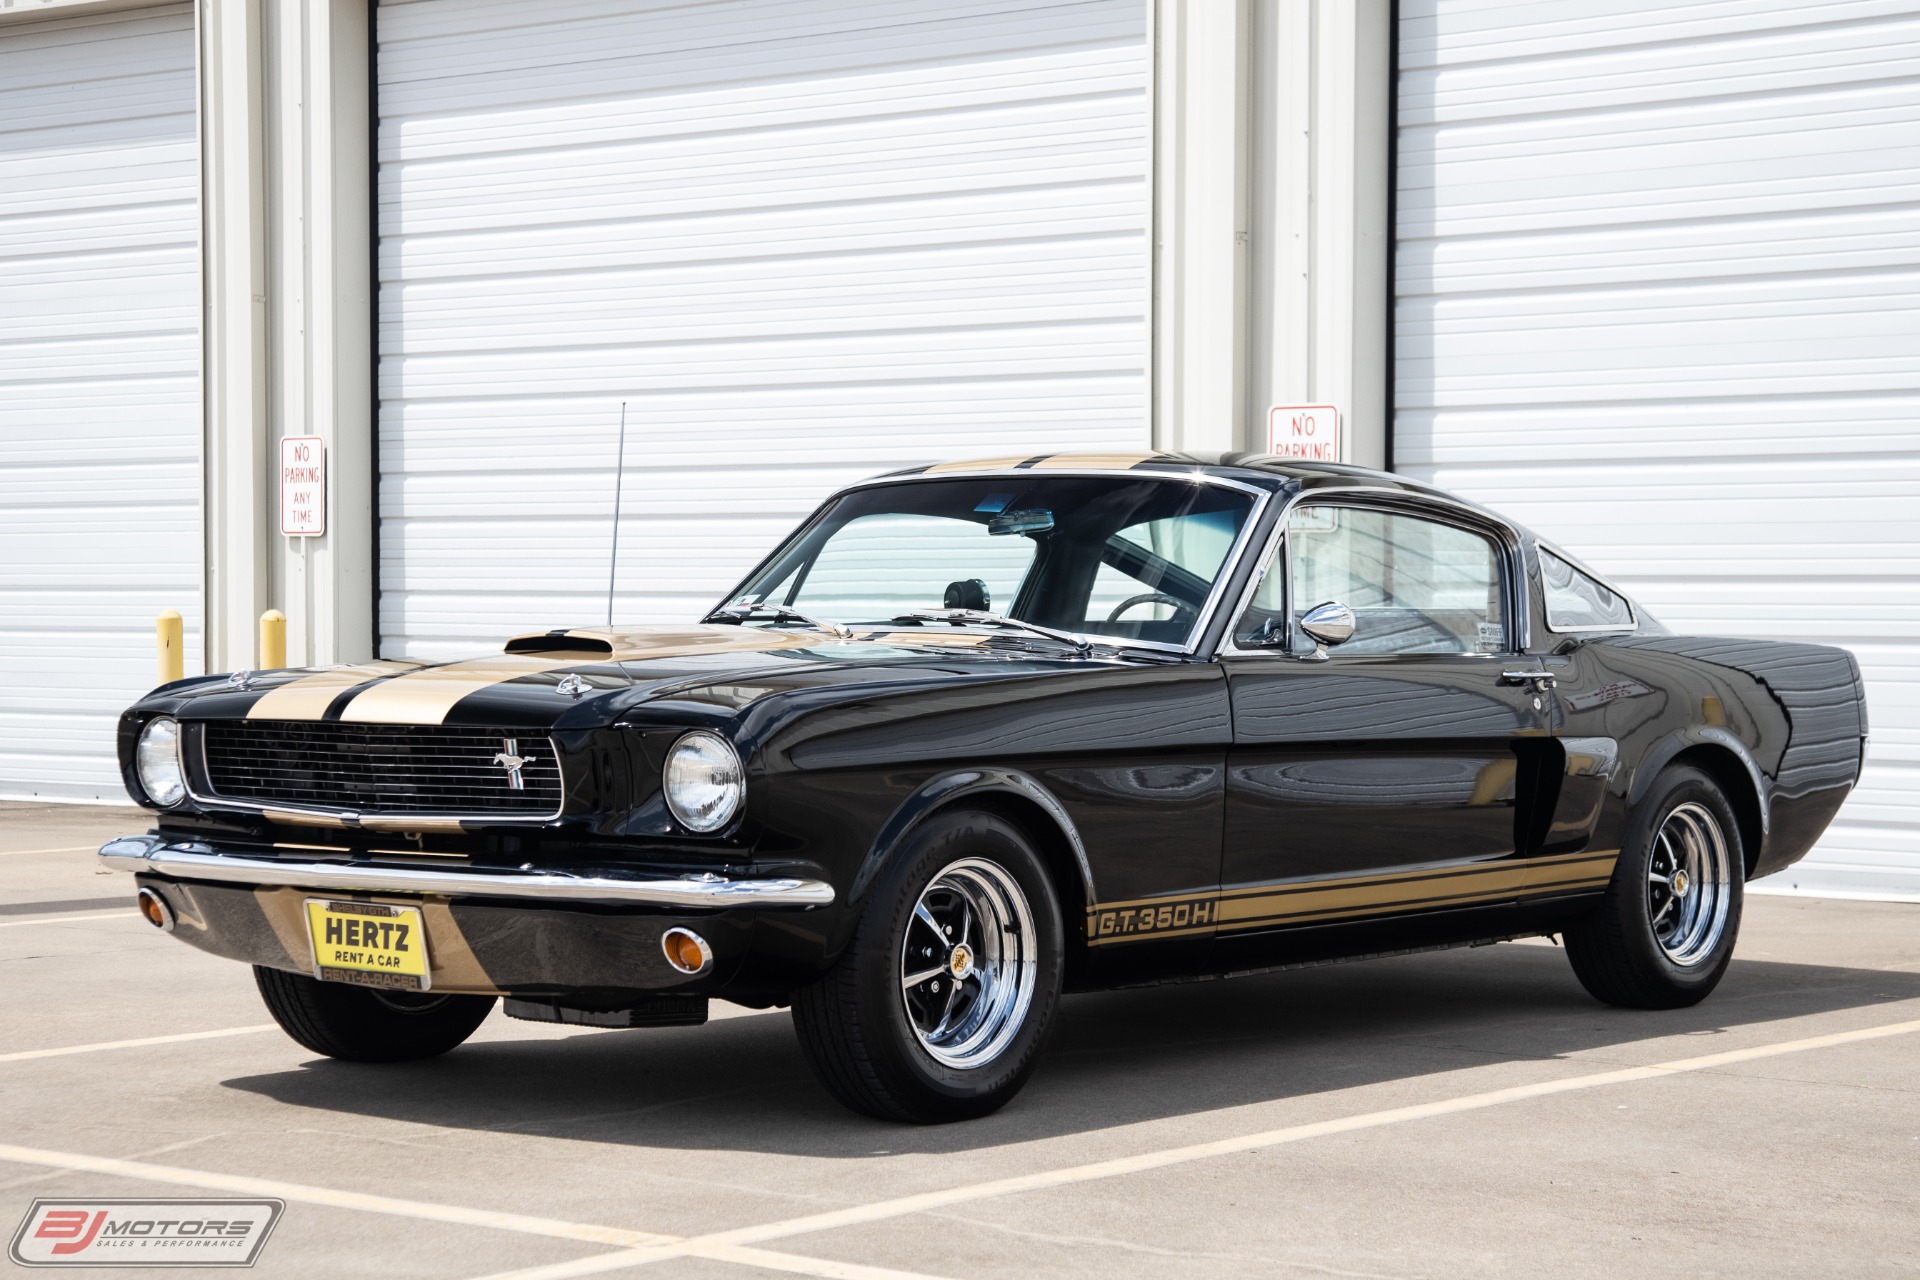 Used 1966 Ford Mustang Shelby Gt350h For Sale Special Pricing Bj